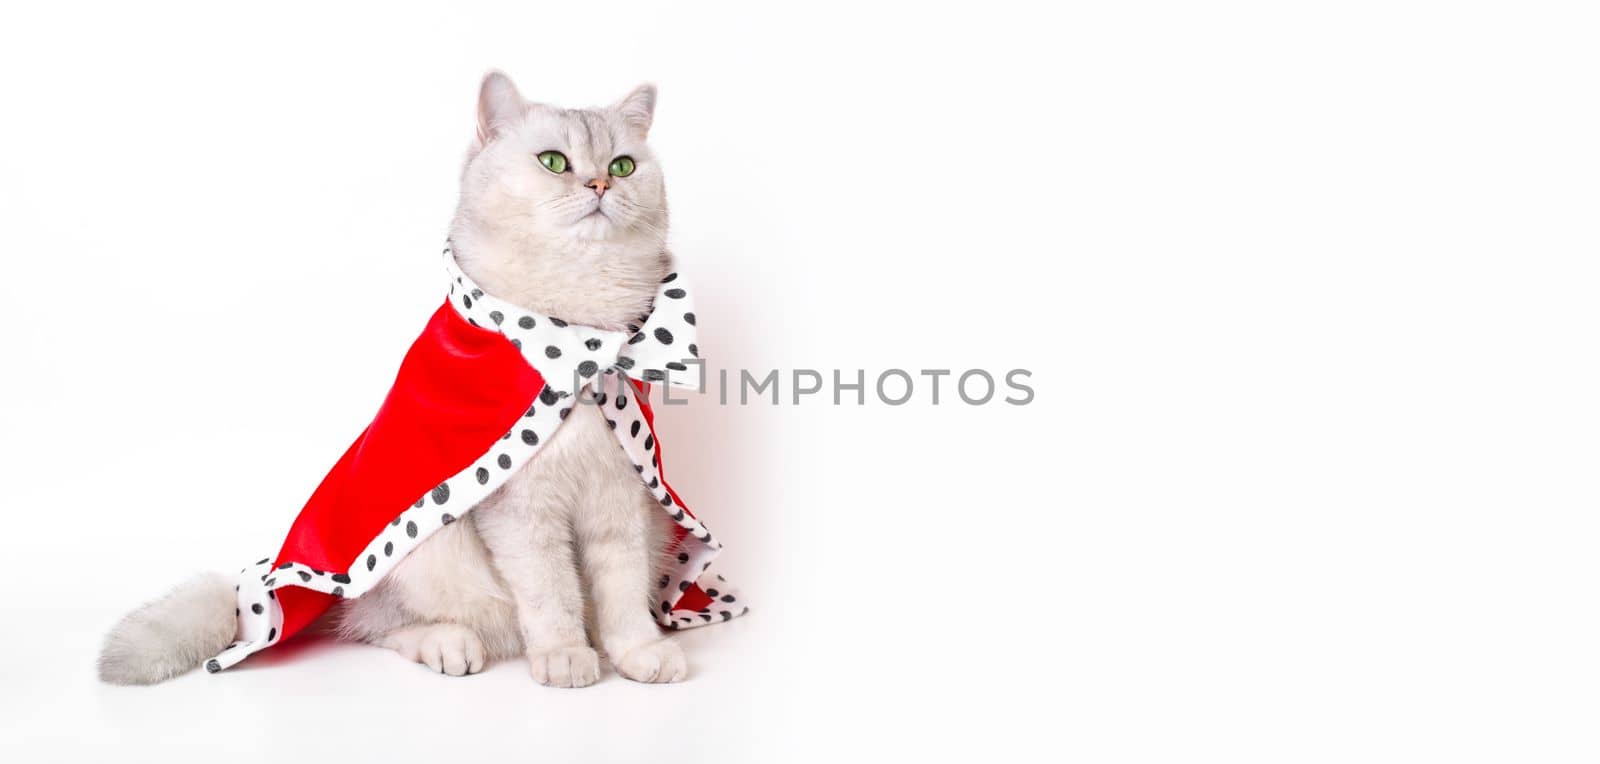 A wide banner with luxurious calm white cat with green eyes in a red royal mantle , sitting on a white background. Copy space